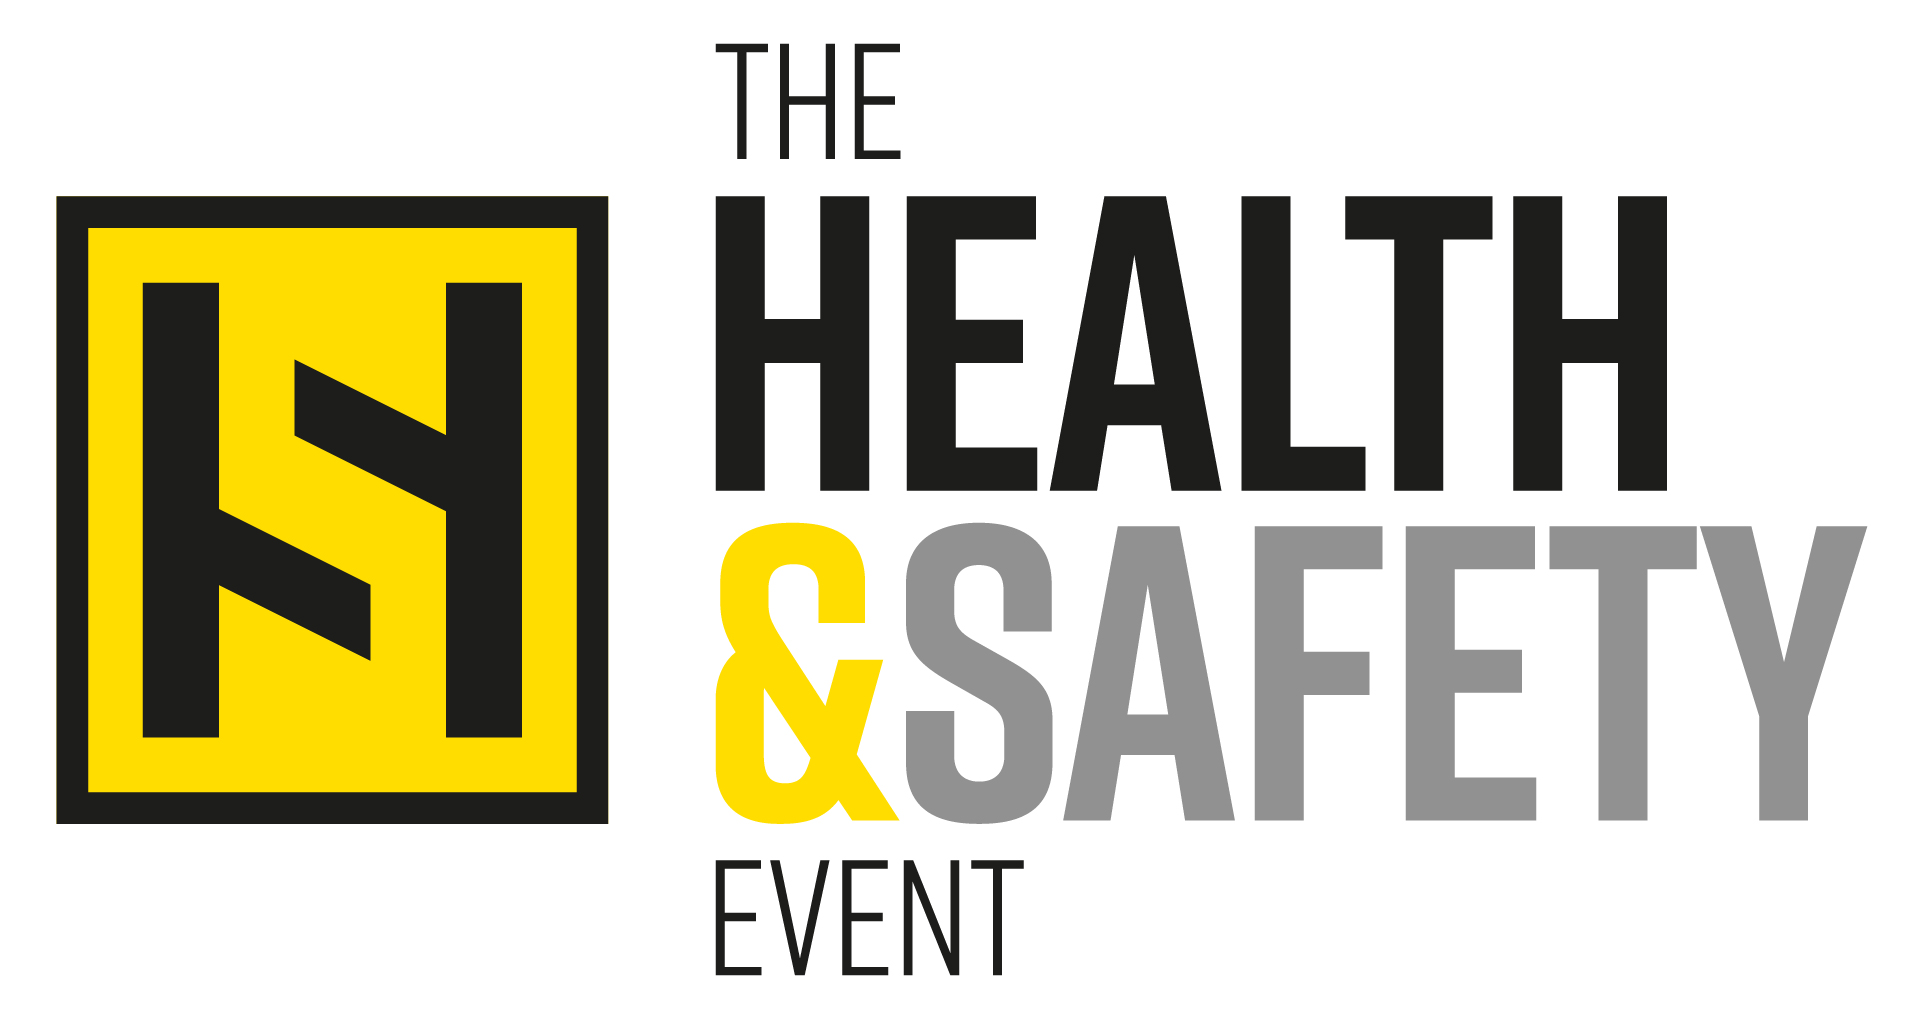 The Health & Safety Event_No dates in colour - Copy.jpg